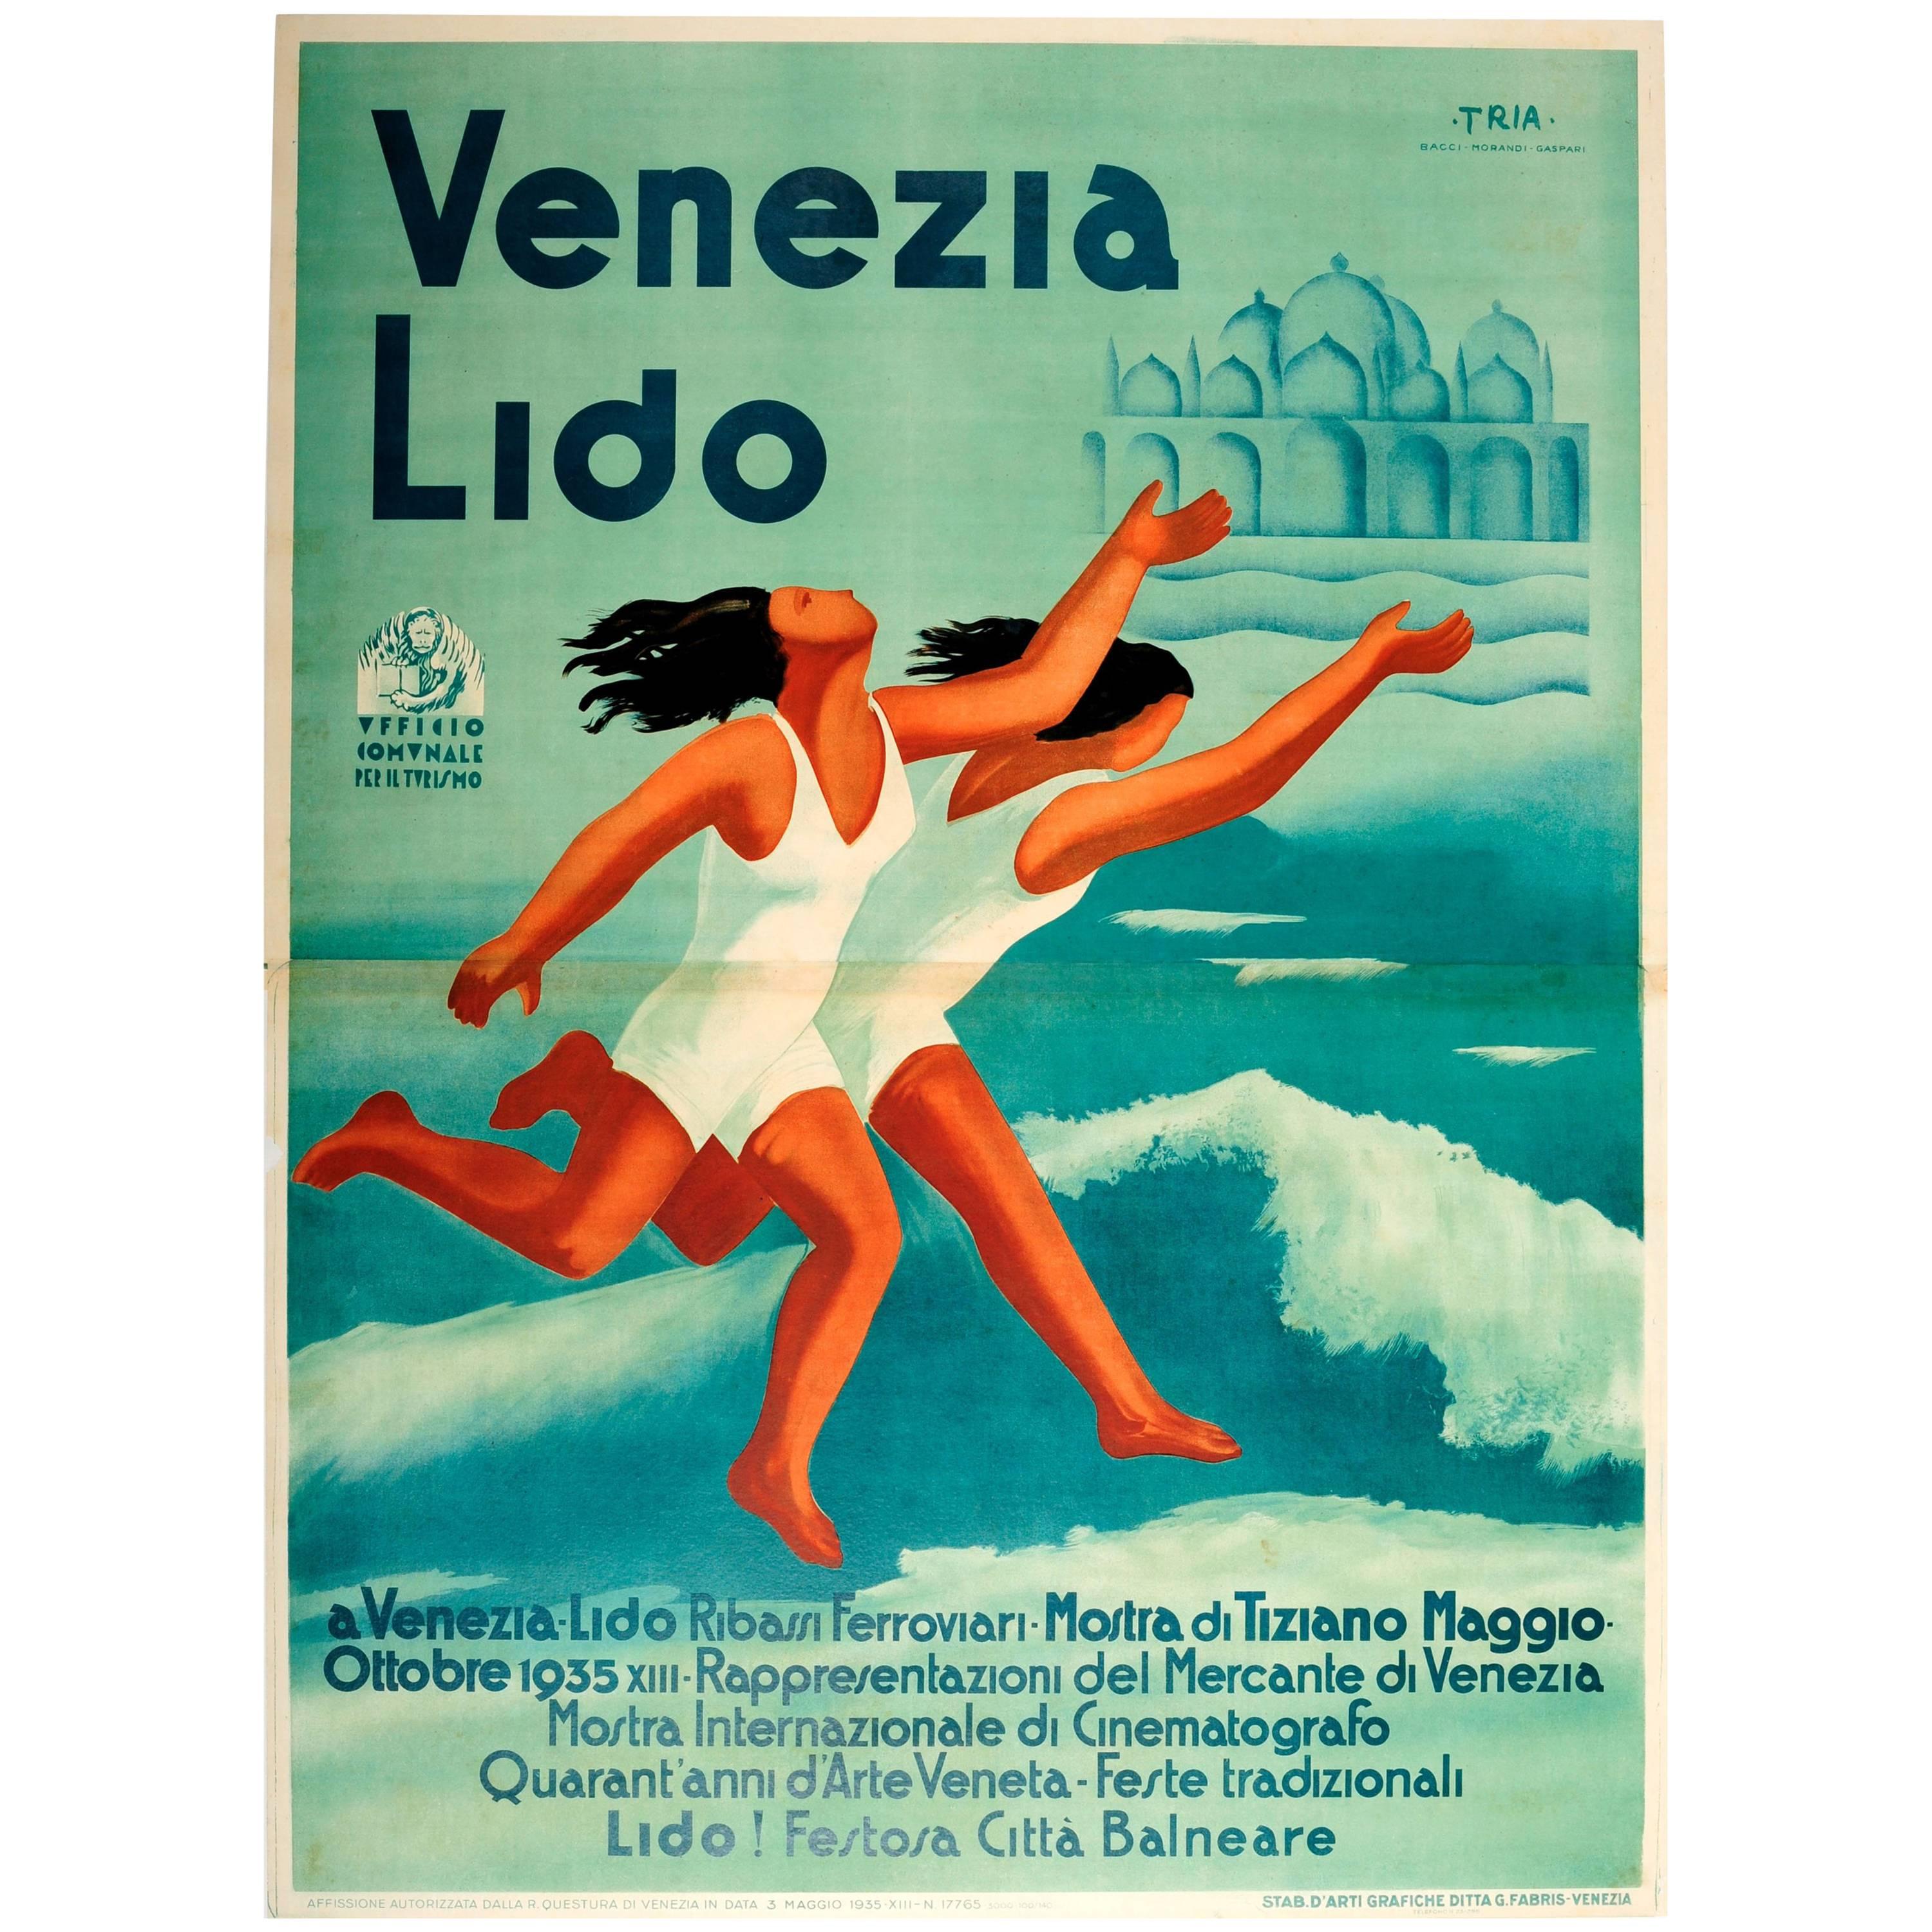 Original Vintage Poster for the 1935 Art and Film Festival Events at Venice Lido